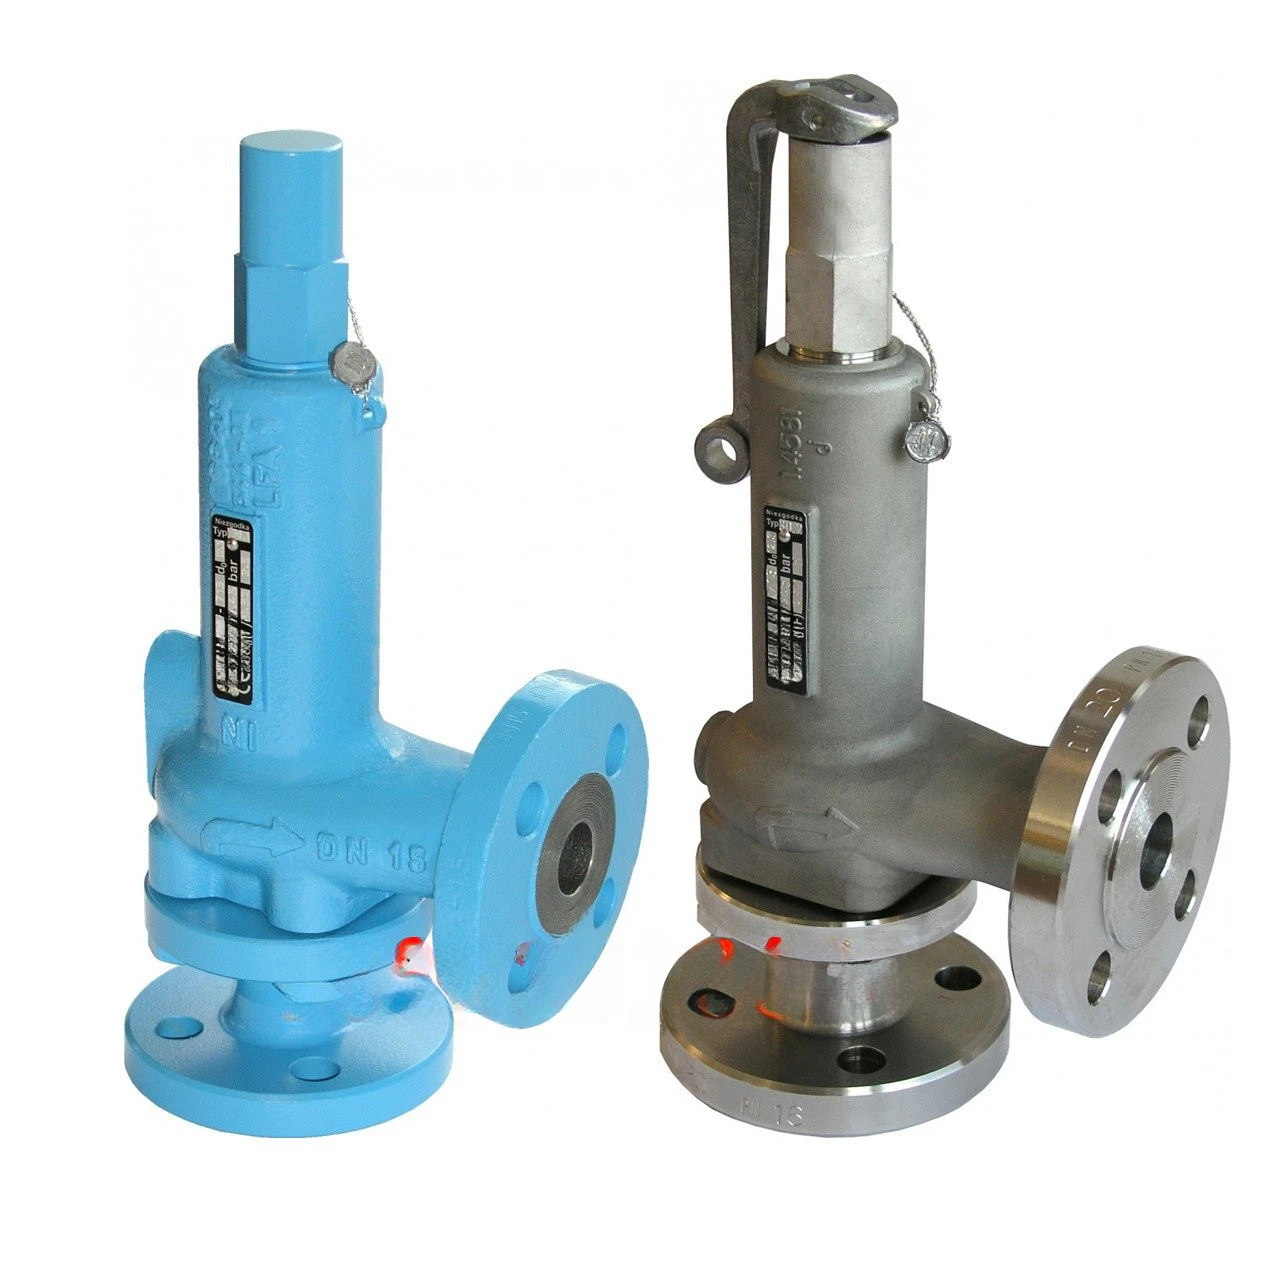 

Imported Marine Safety Valve Typ 30 Suitable for Niezgodka Valve Right Angle Safety Valve